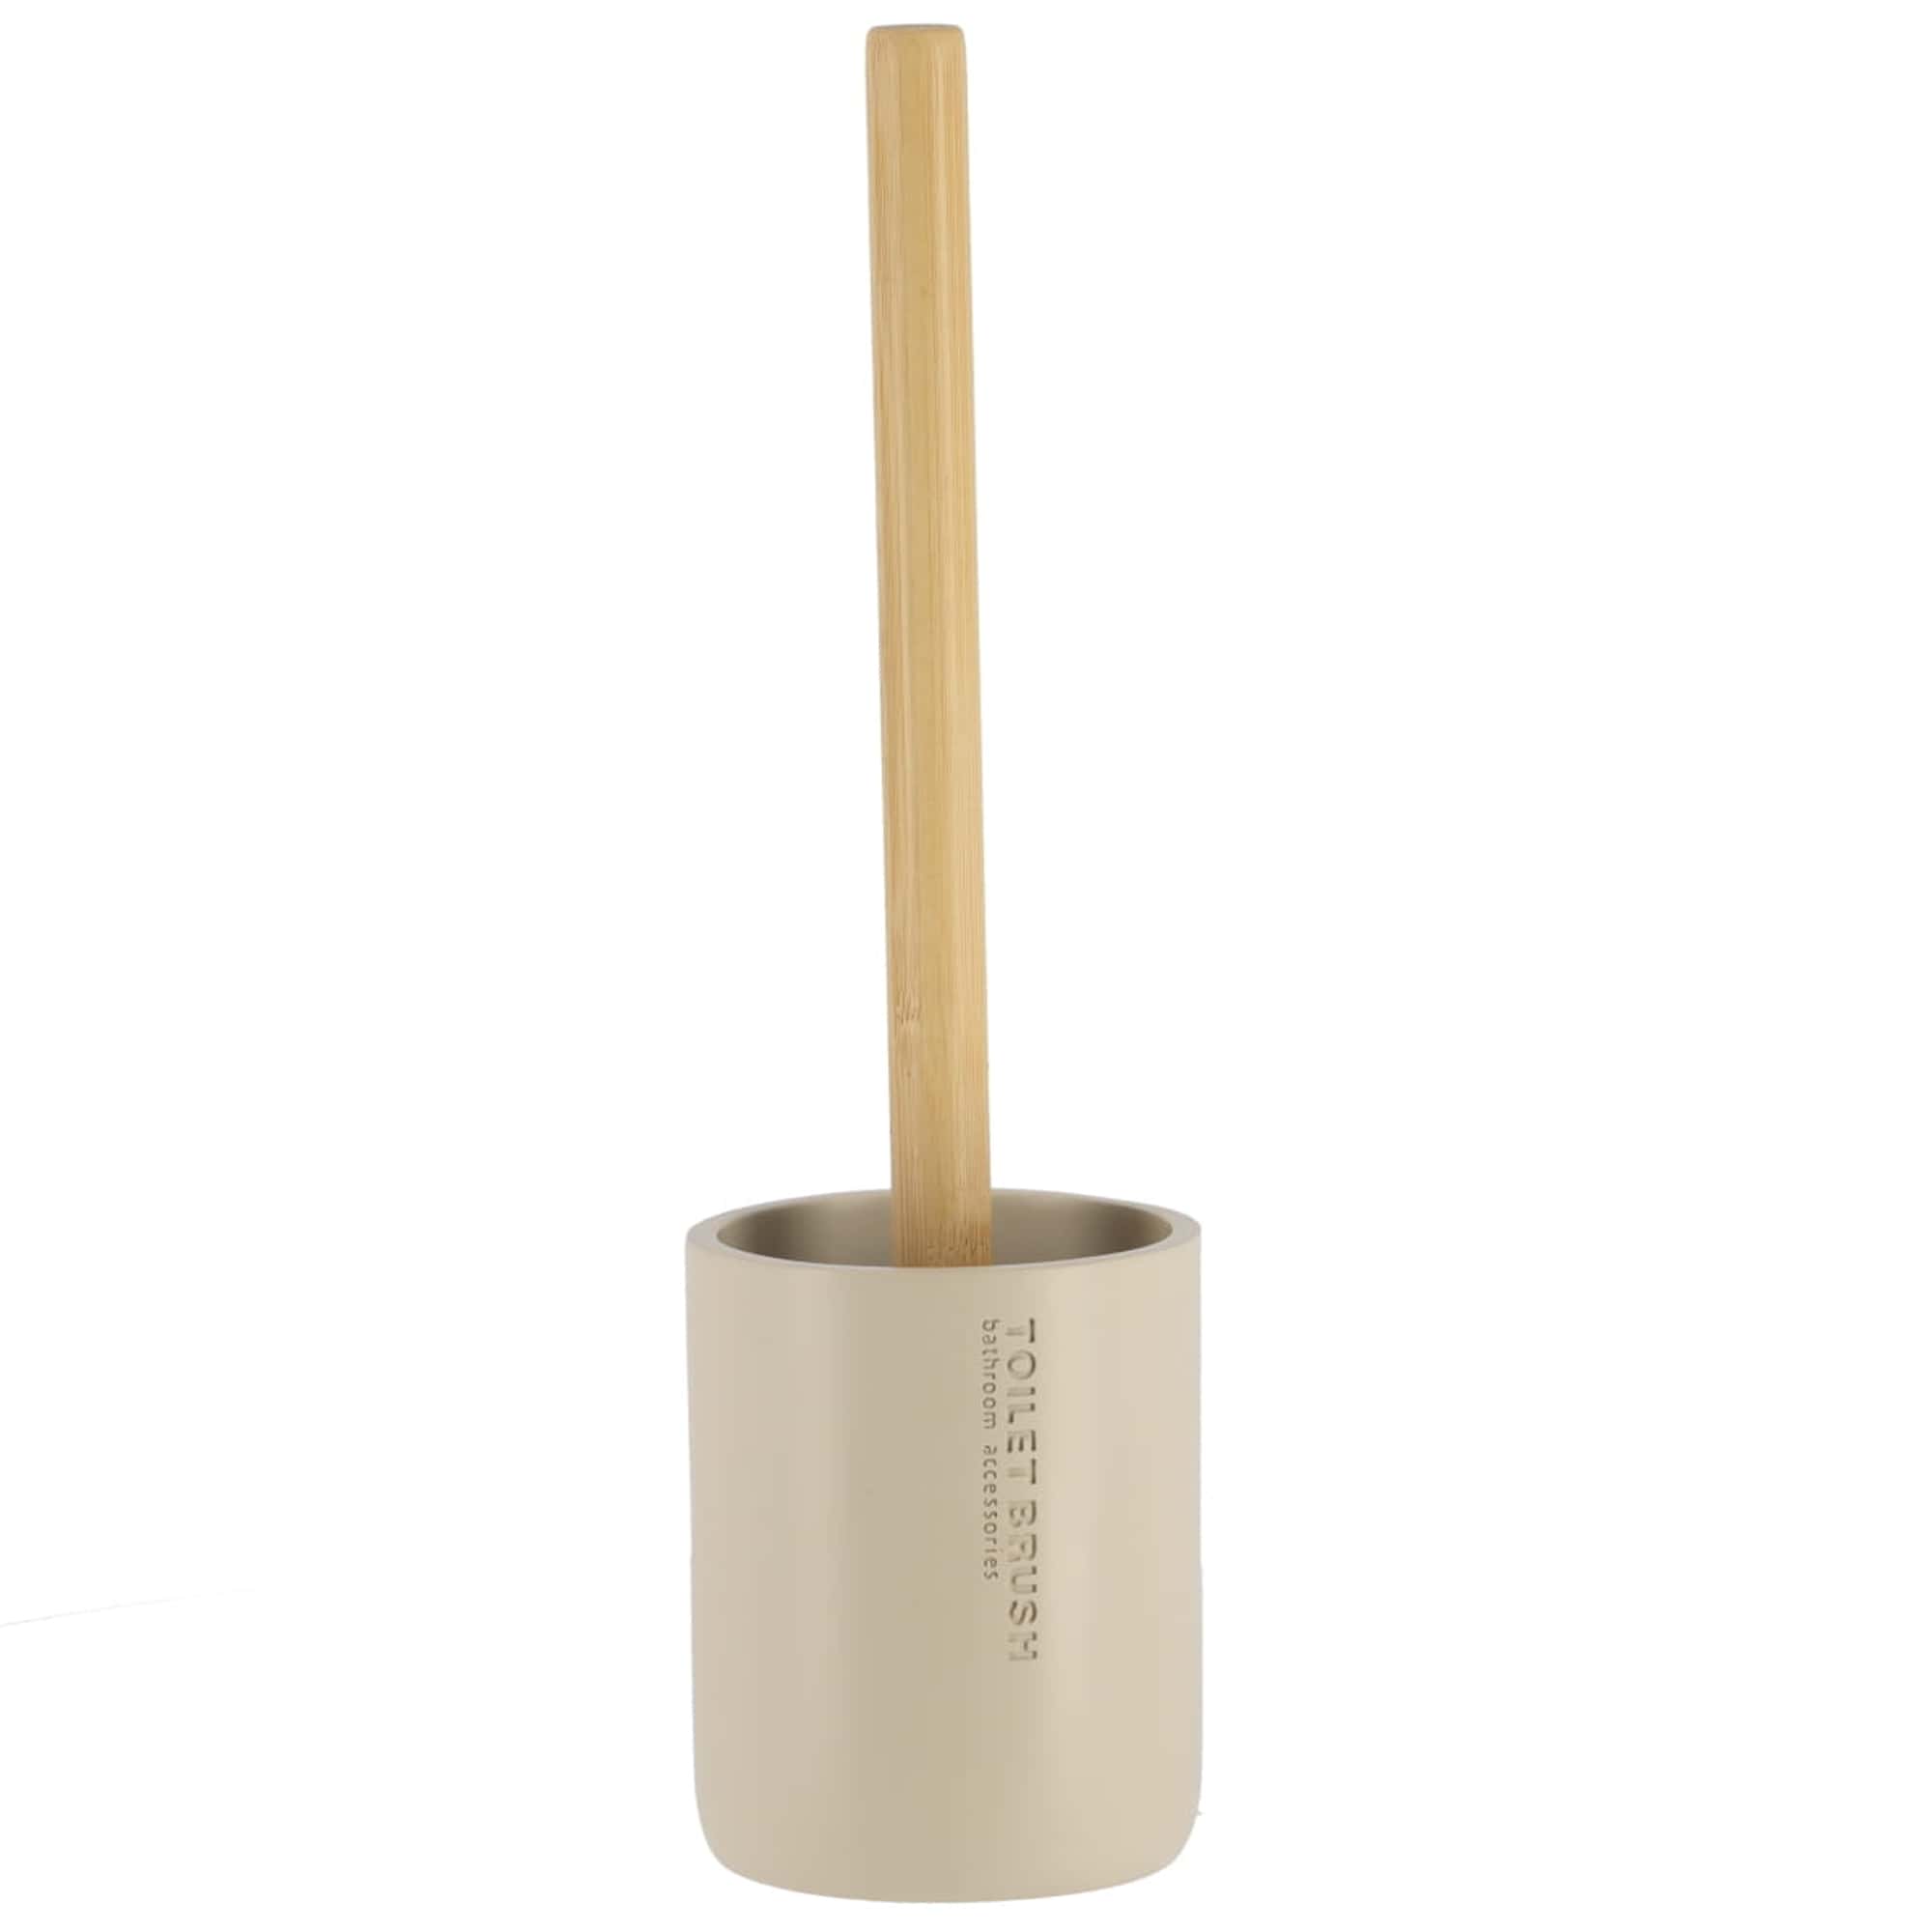 Stylish Matte Beige Toilet Brush and Holder Set with Natural Bamboo Handle Polyresin Bathroom Cleaning Solution